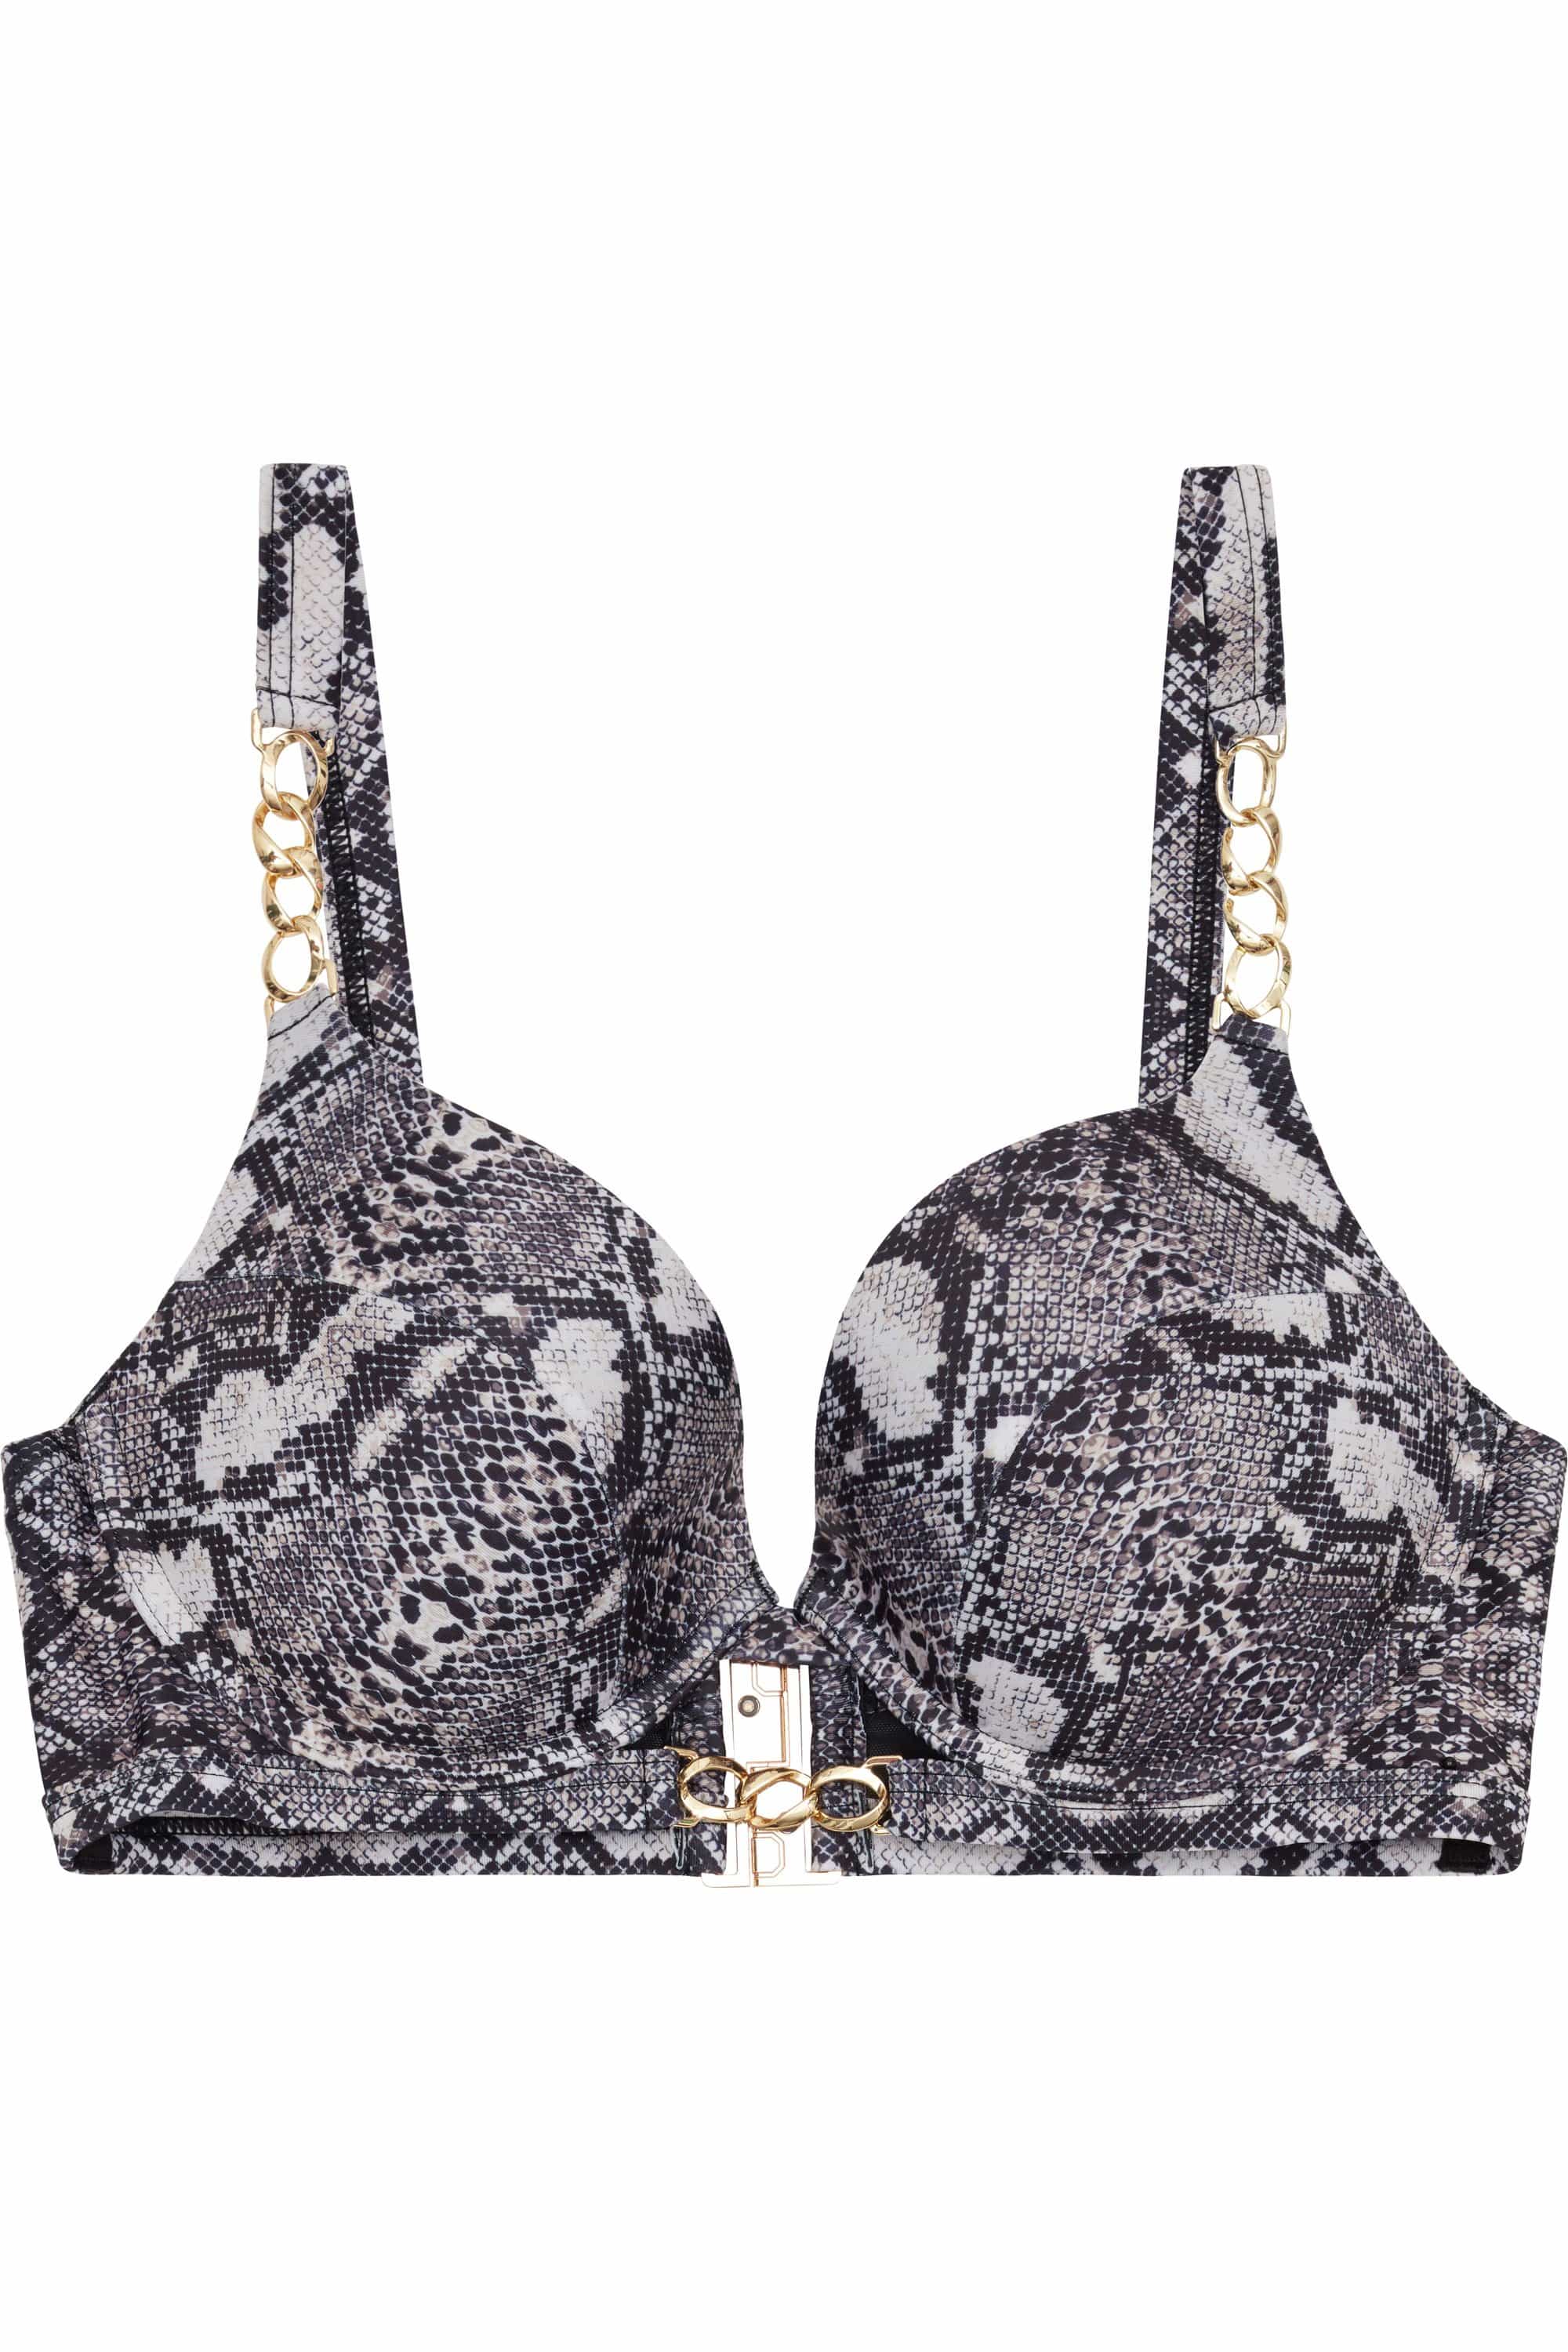 Eco Snakeskin chain push up top B - G